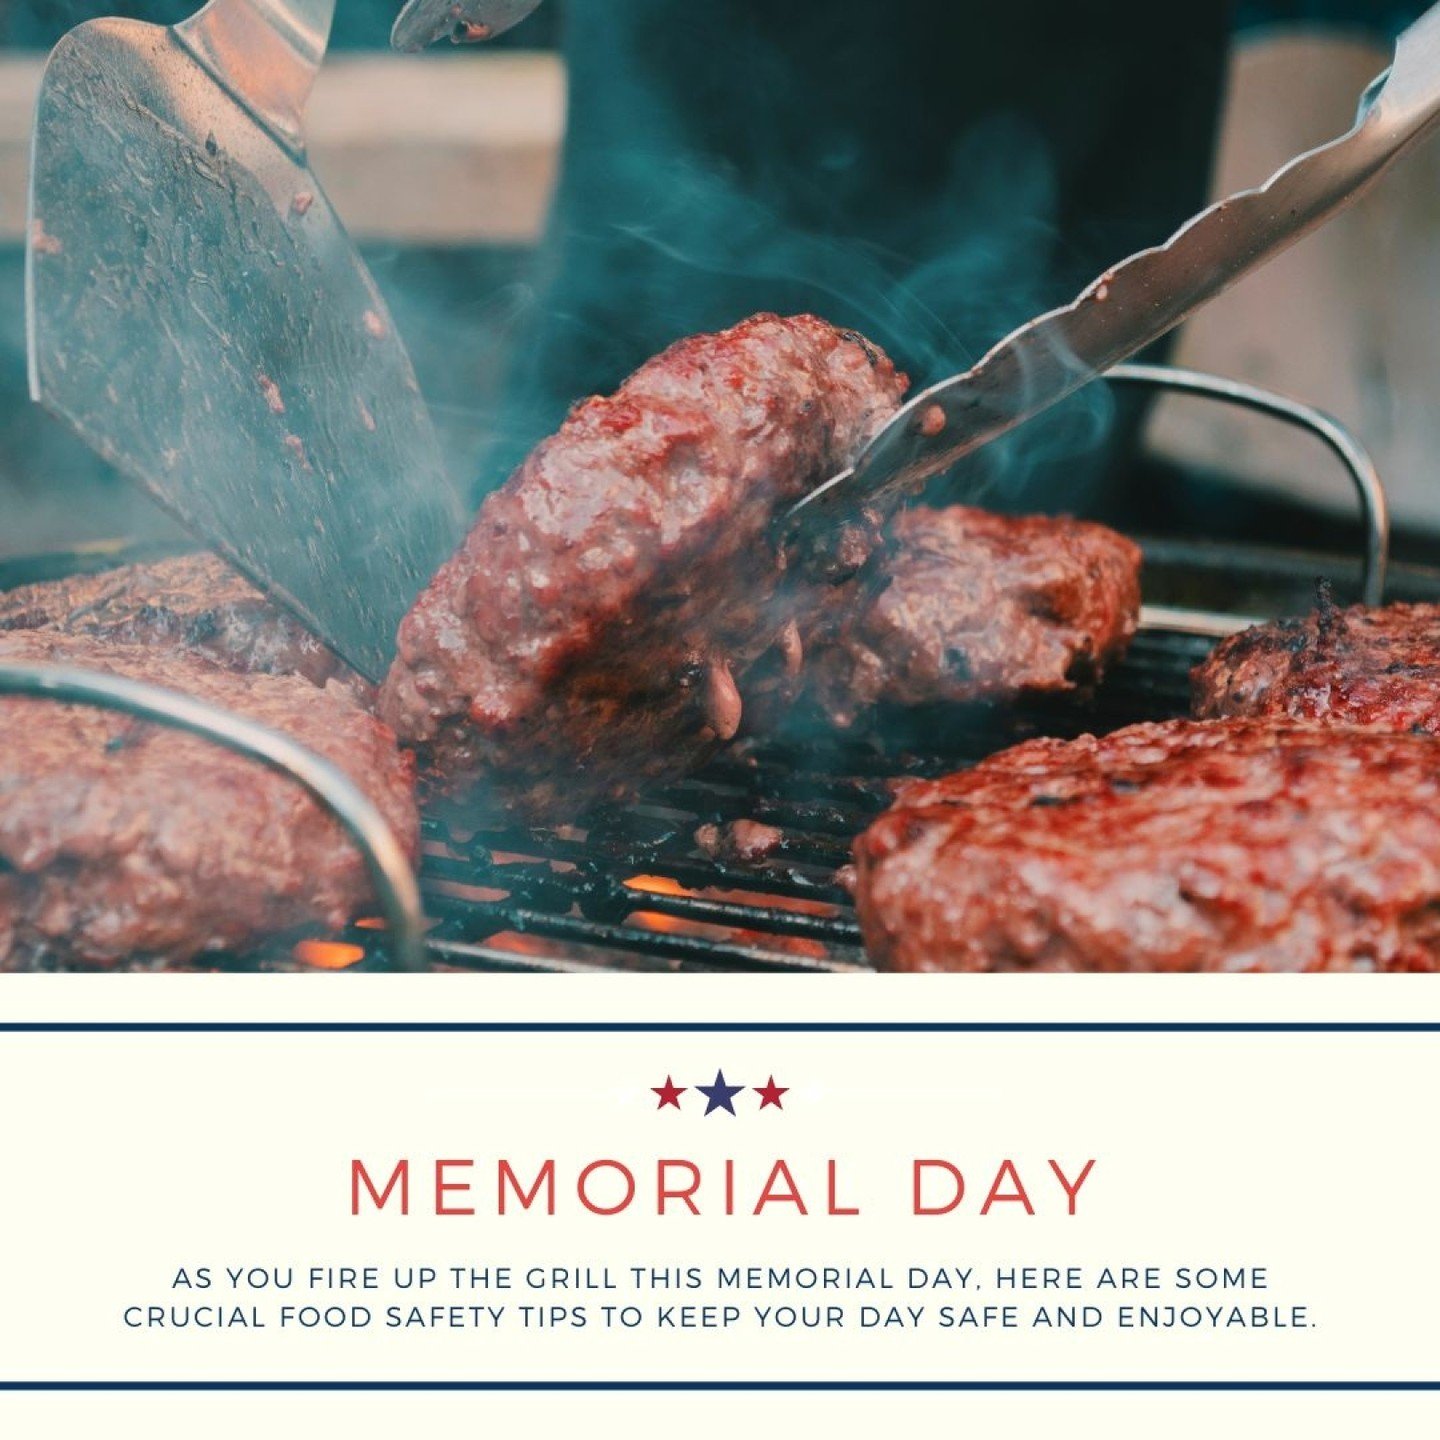 As you fire up the grill this Memorial Day, here are some crucial food safety tips to keep your day safe and enjoyable:

1. Clean: Wash your hands and surfaces often. This helps prevent the spread of bacteria.🧼

2. Separate: To avoid cross-contamina